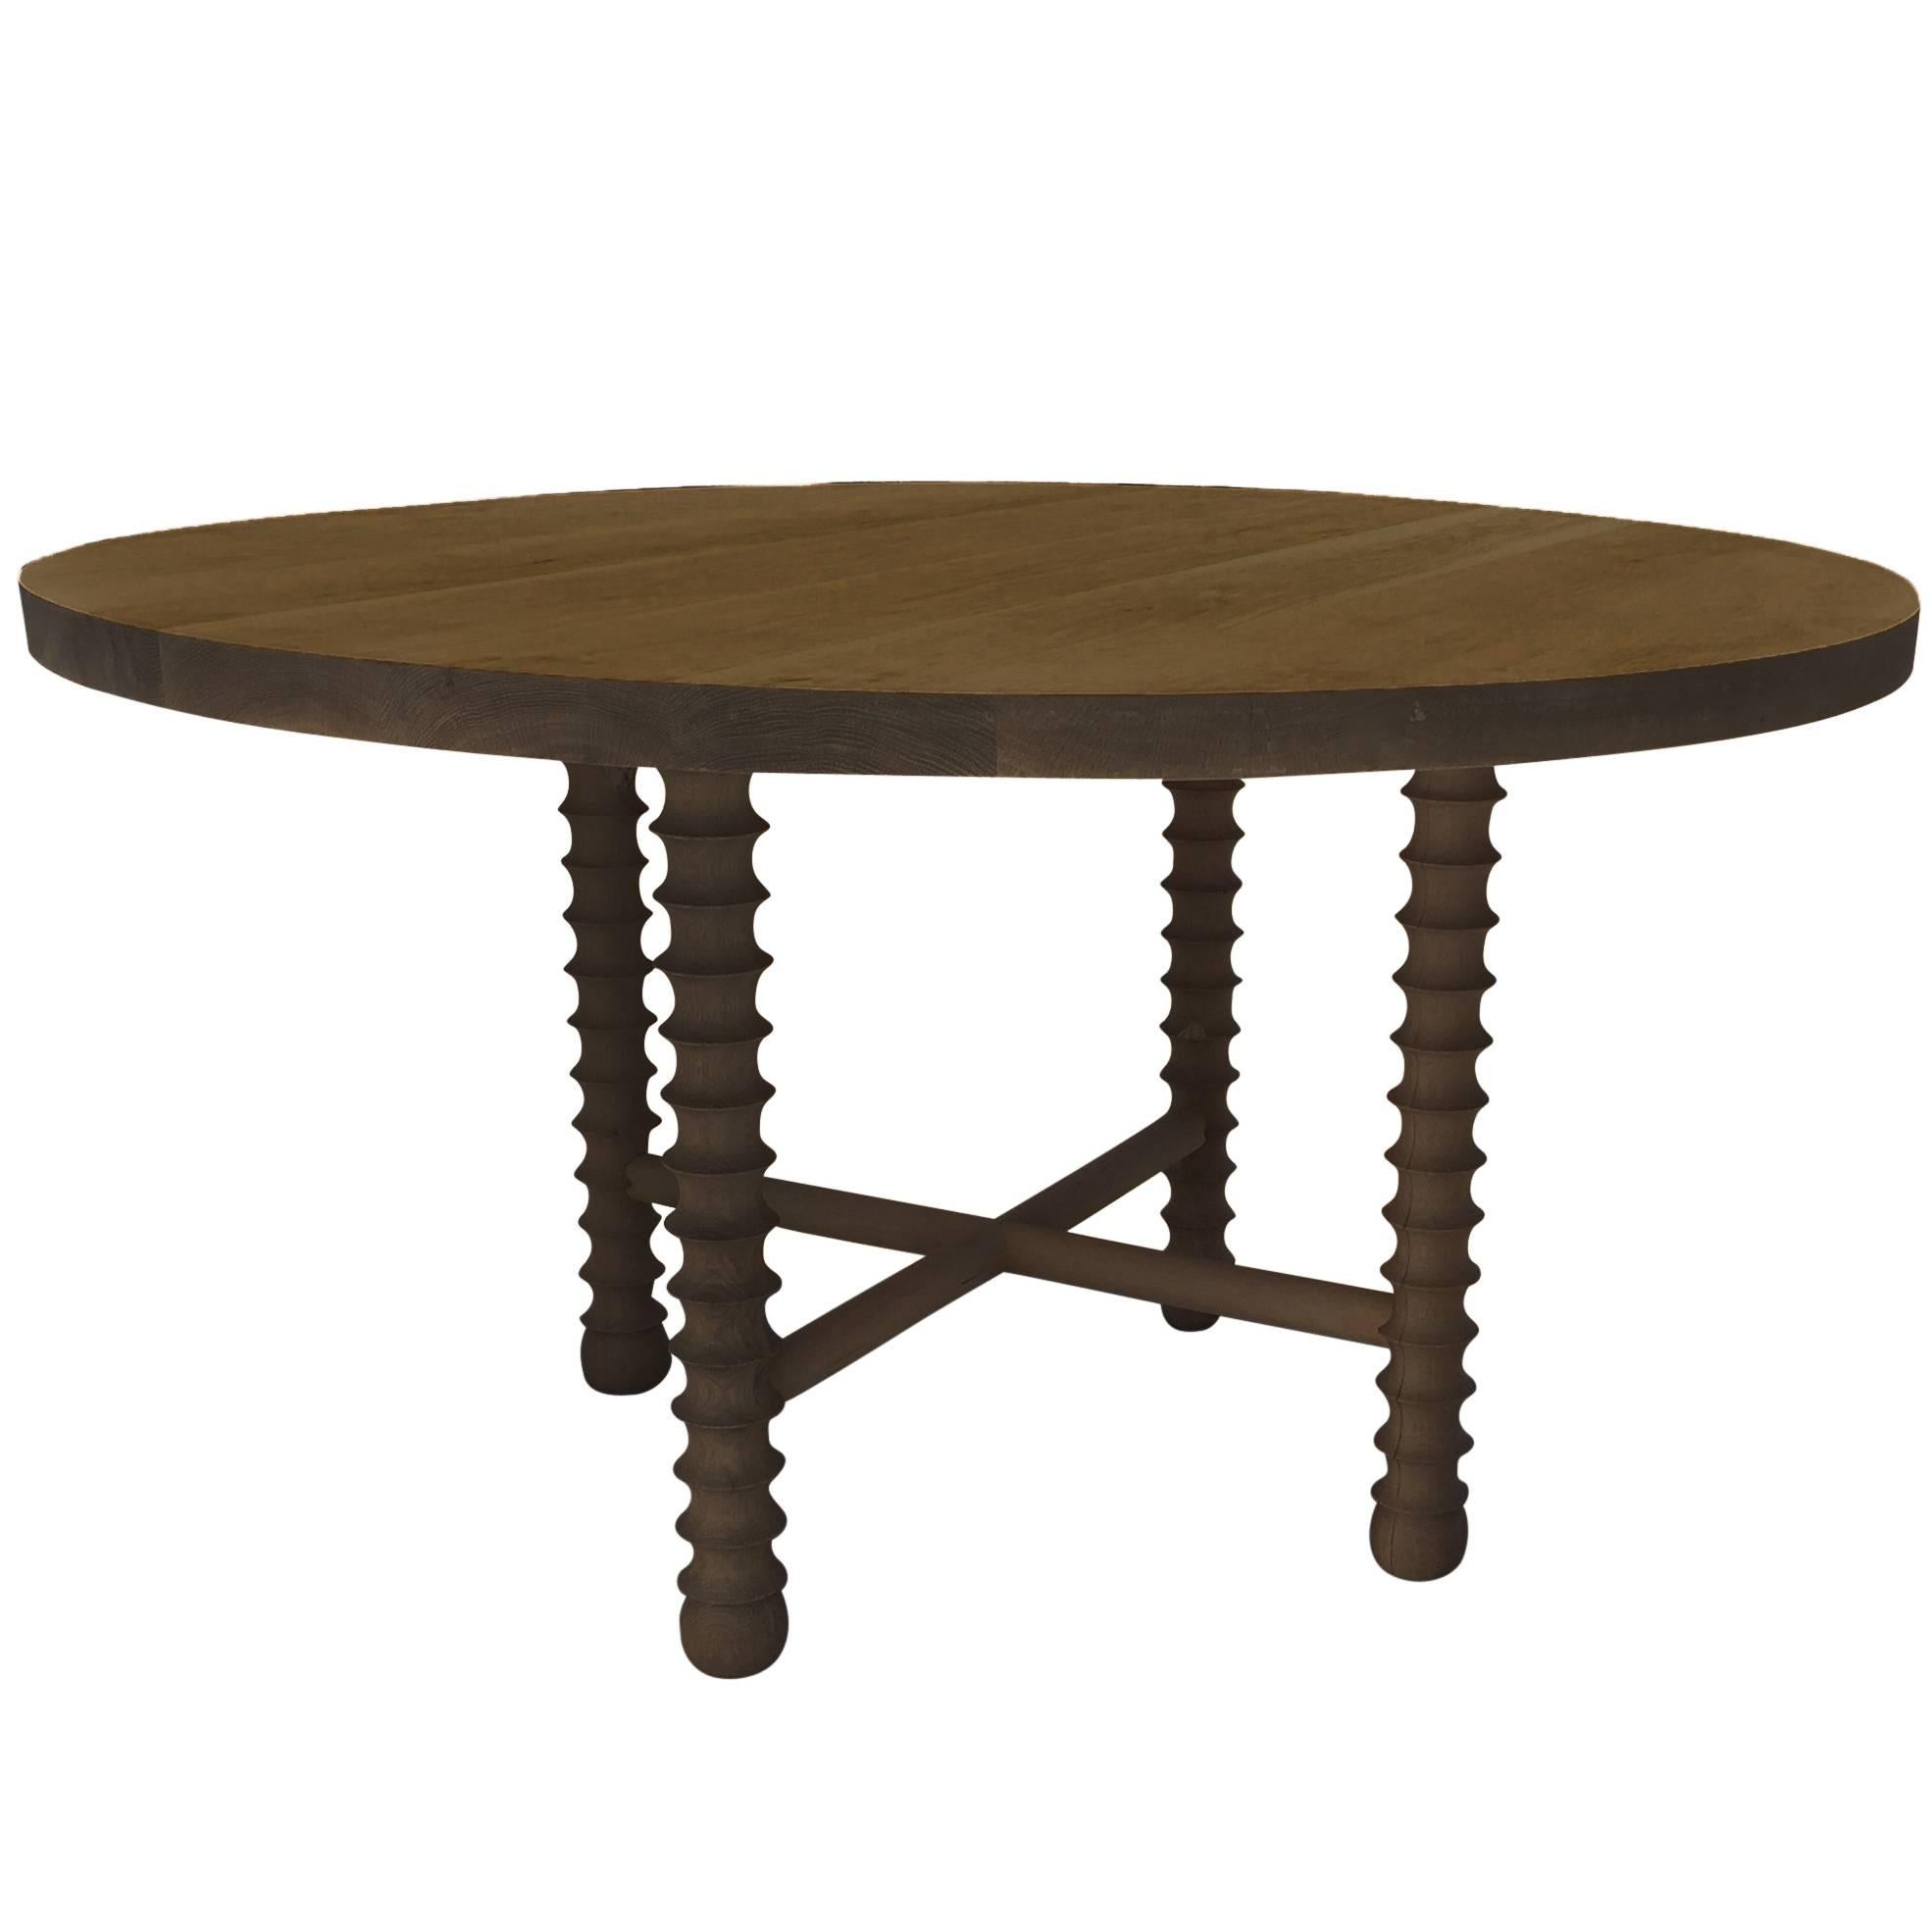 Ojai Round Dining Table in Dark Oak Finish by Haskell Studio For Sale